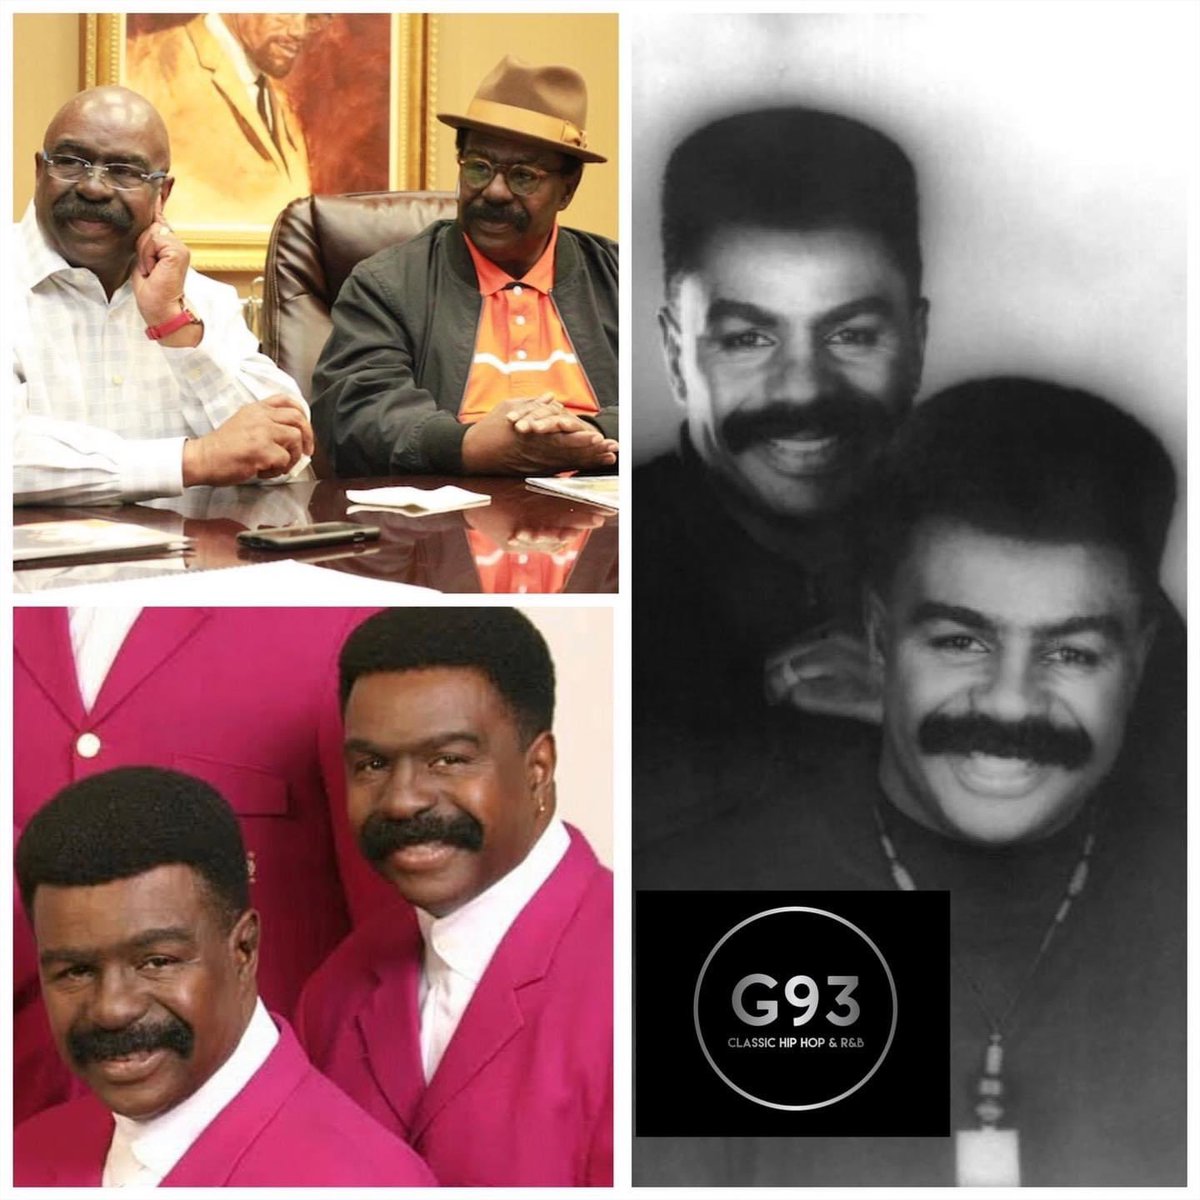 🥂🎈🥂🎈🥂
Still Rocking Steady!!👑👑
Happy 78th Birthday To The Twins Walter & Wallace “Scotty” Scott From The Legendary Group #TheWhispers! #WalterScott #WallaceScott #G93Radio